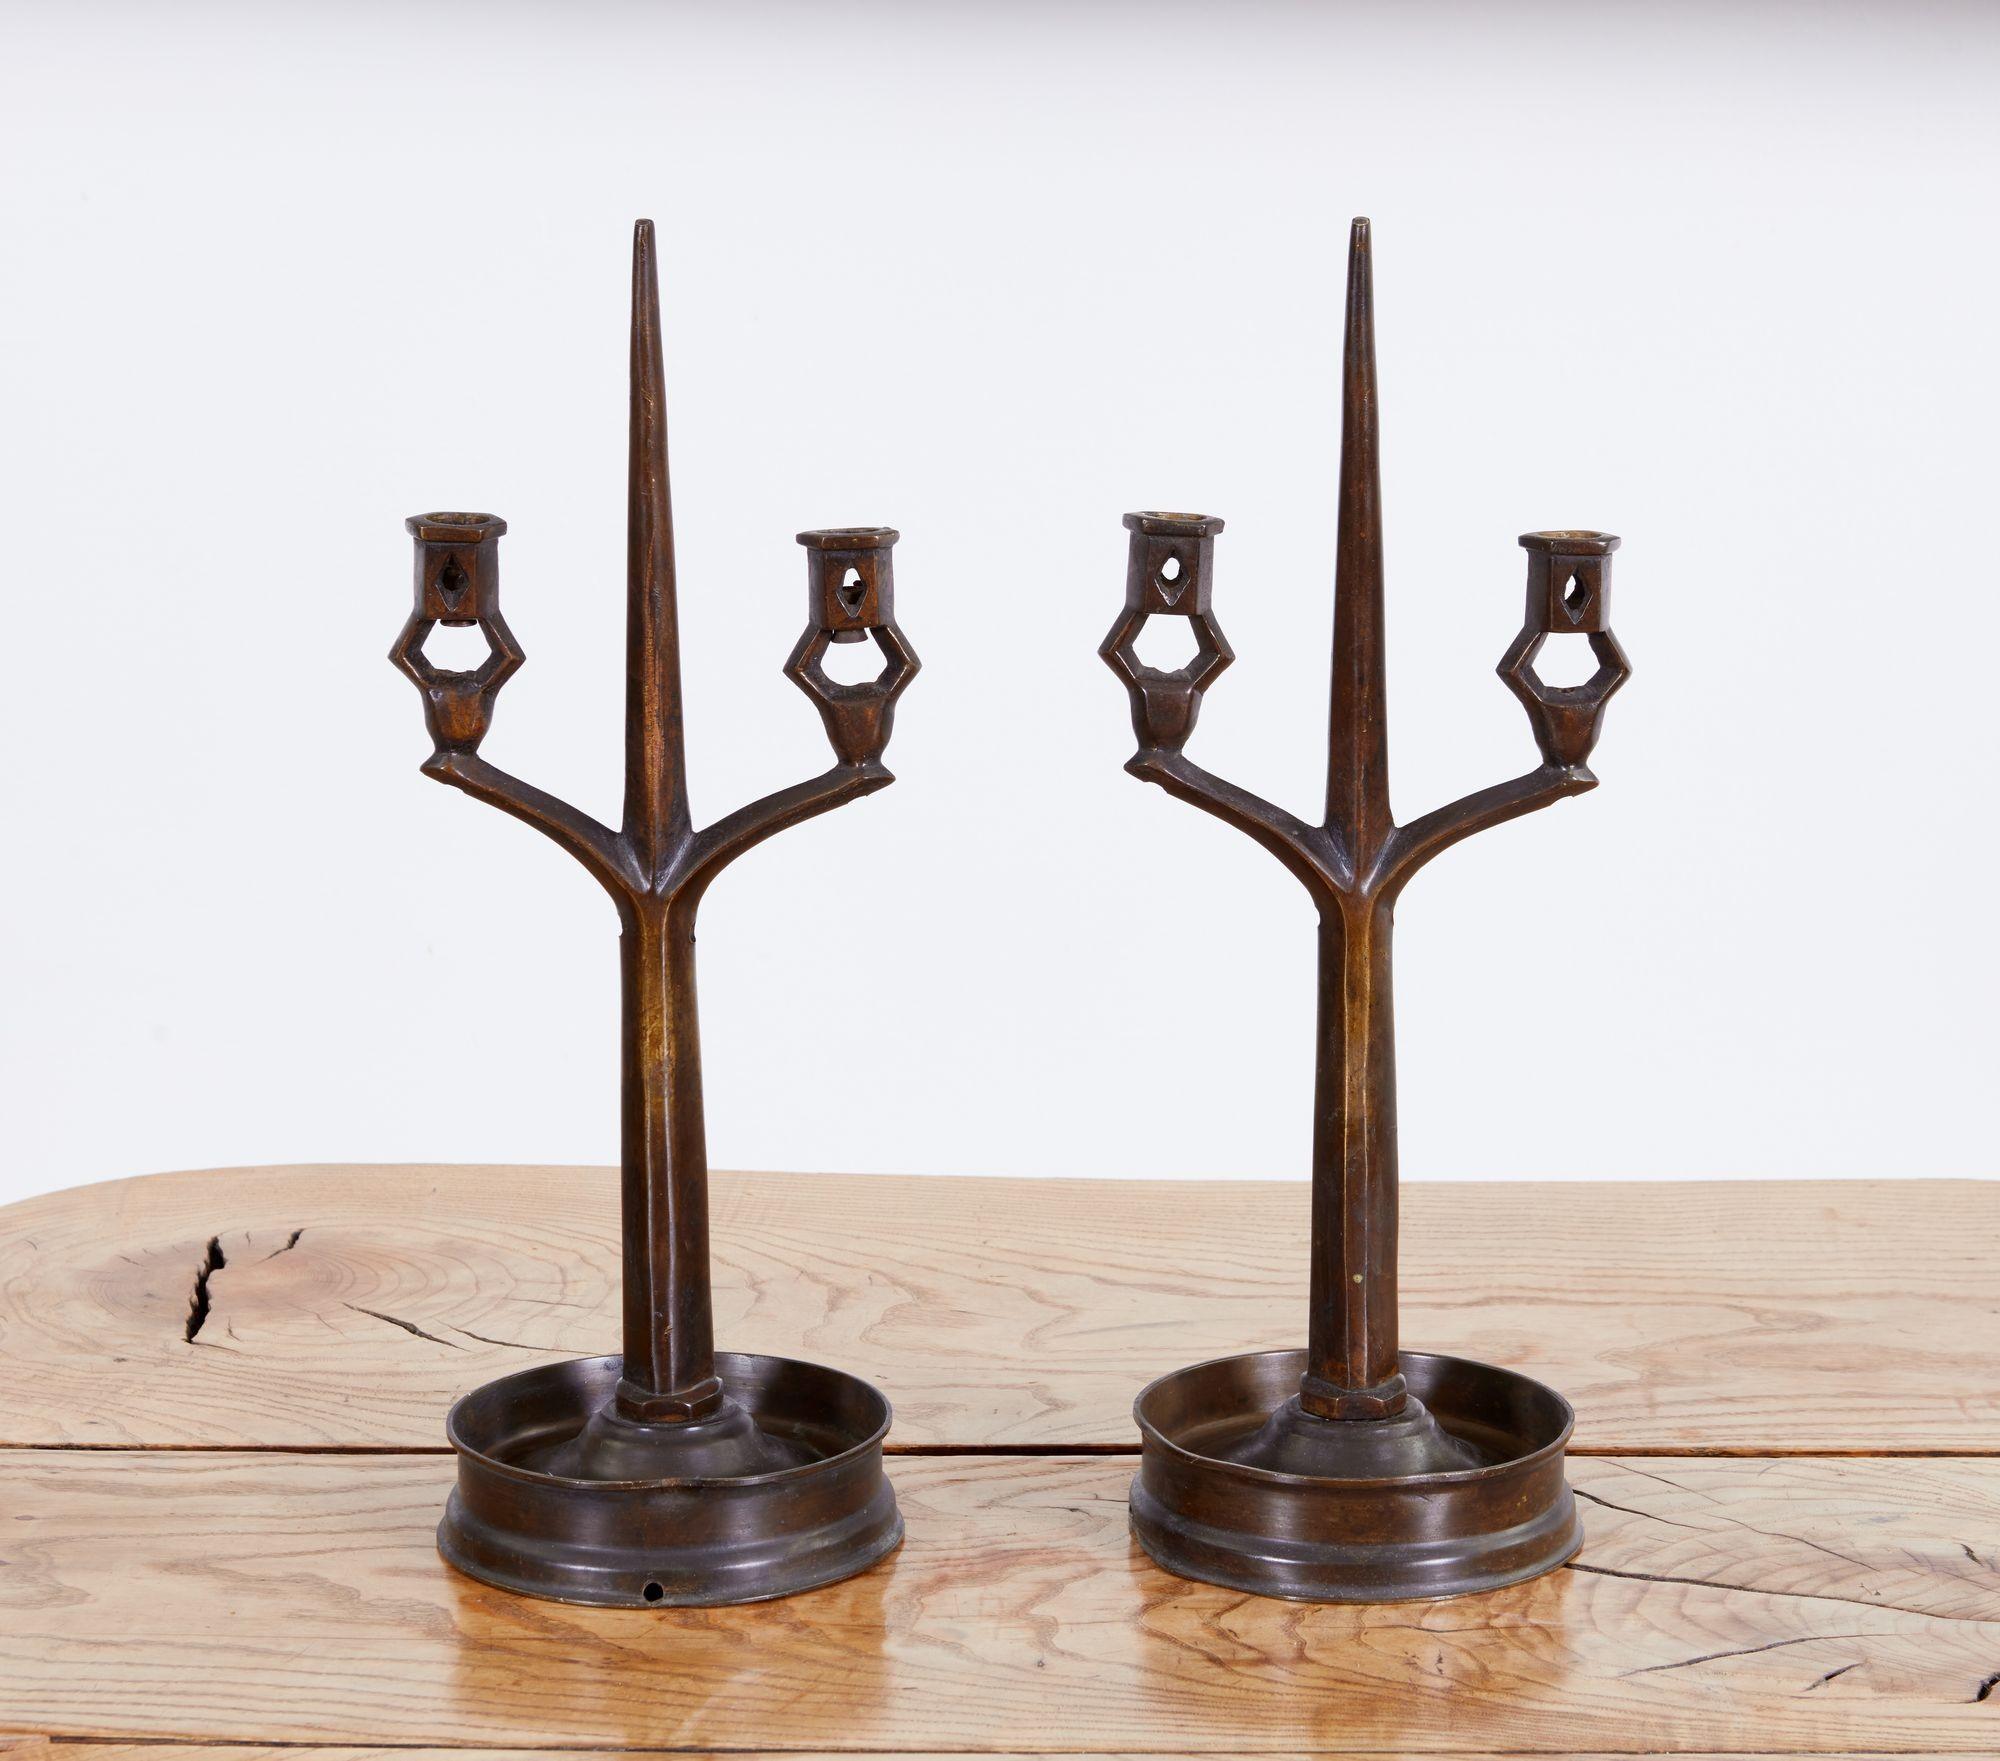 A pair of Arts and Crafts period two light candlesticks made of heavy bronze. Central tapered octagonal pricket surmounted by twin open candle sockets over turned base with deep drip pan, in a stylized gothic manner. Good rich glowing chocolate